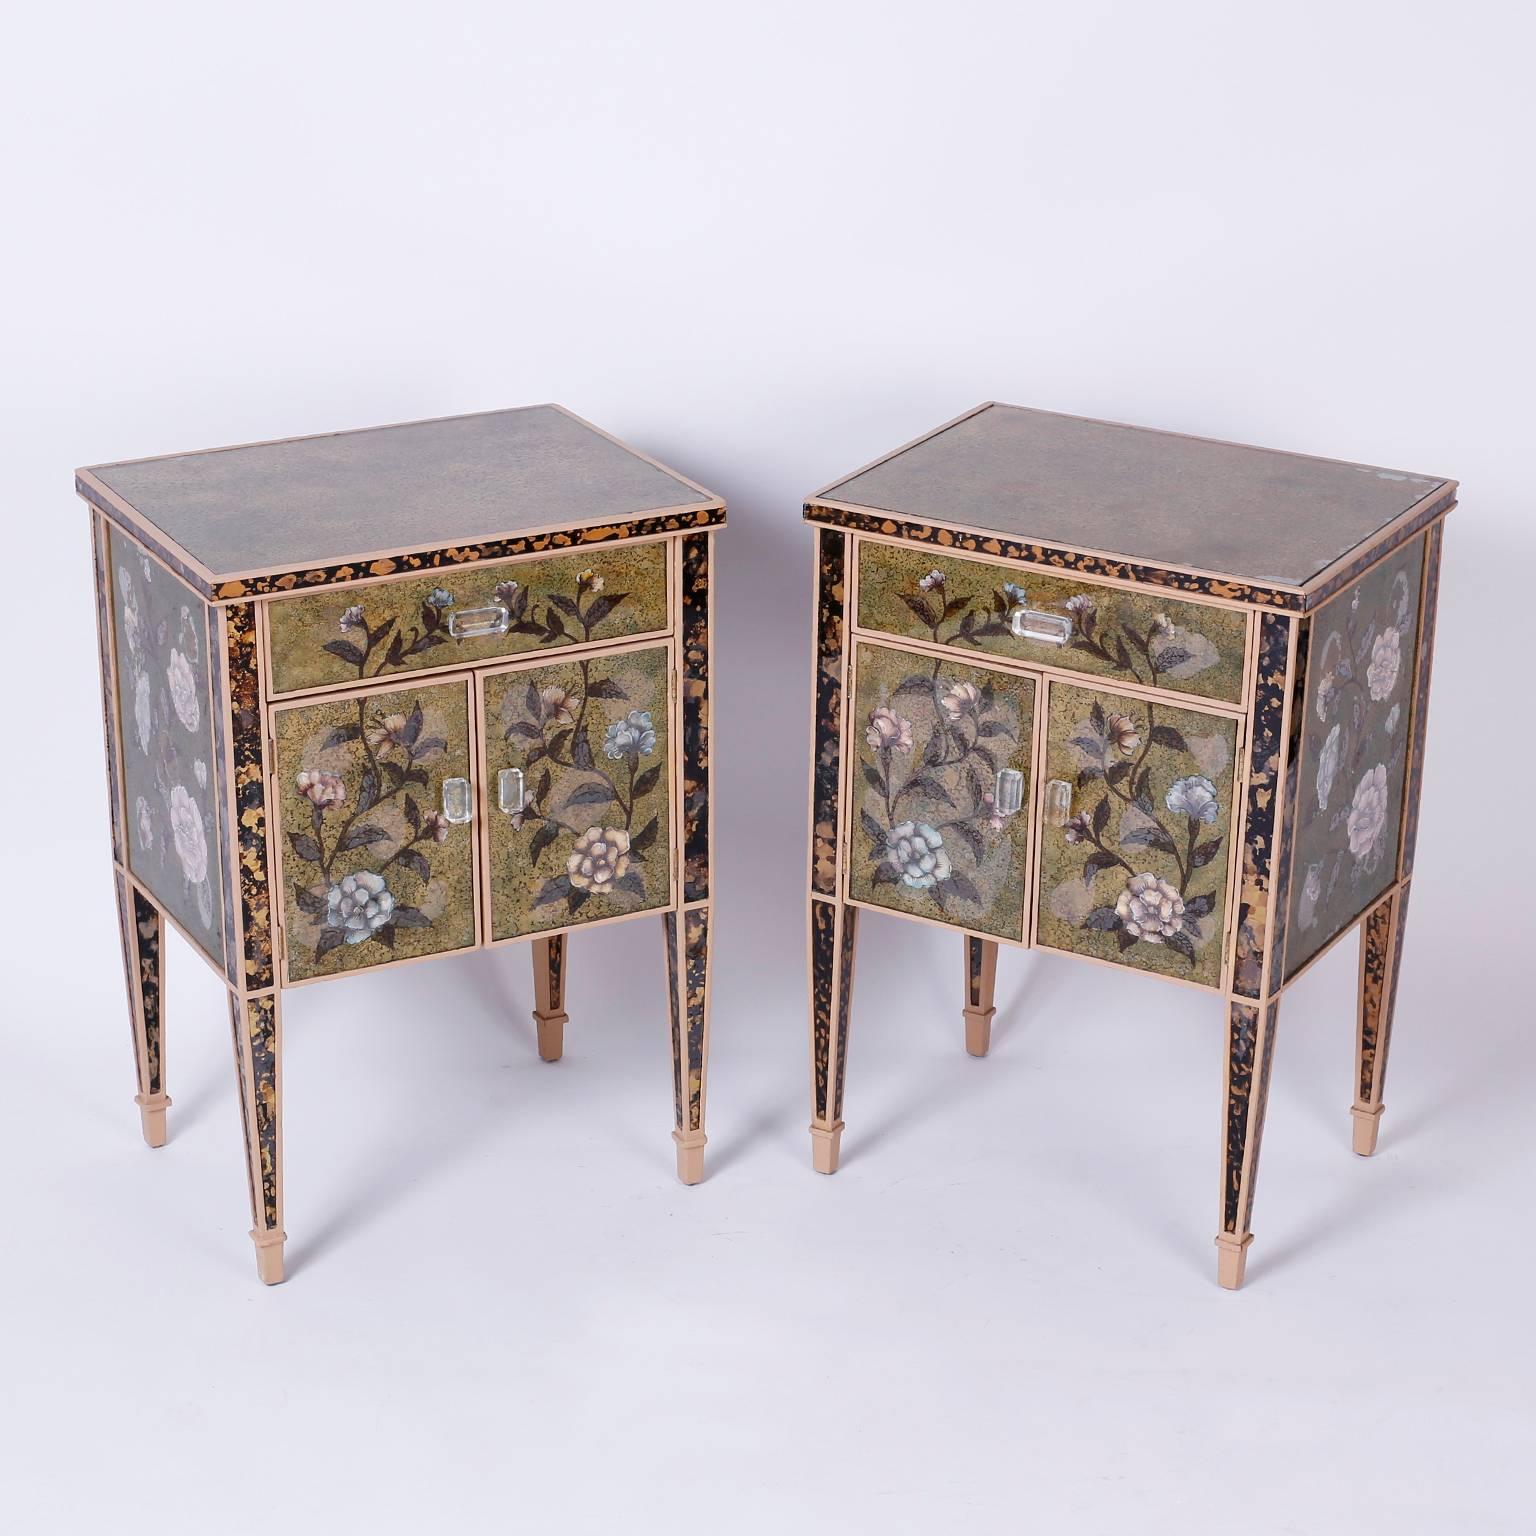 Pair of Italian mirrored nightstands or cabinets with classic form and decorated with chic reverse painted or églomisé floral designs in the Venetian style over a green background. Each with one drawer and two cabinet doors having Lucite pulls.